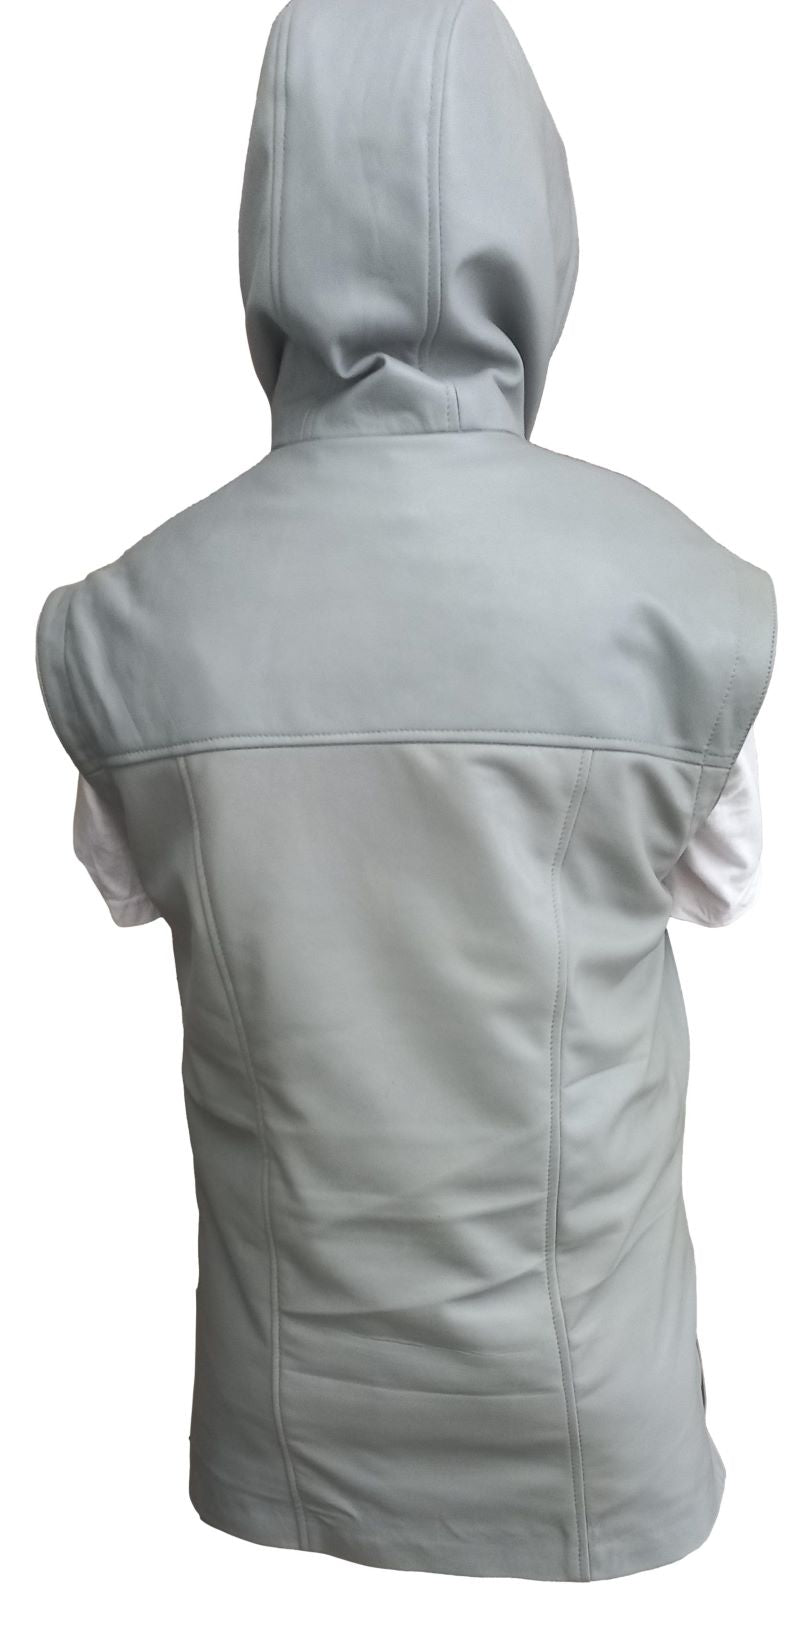 Effortless Cool: Premium Leather Vest in gray with Hood- ChersDelights  Leather Apparel